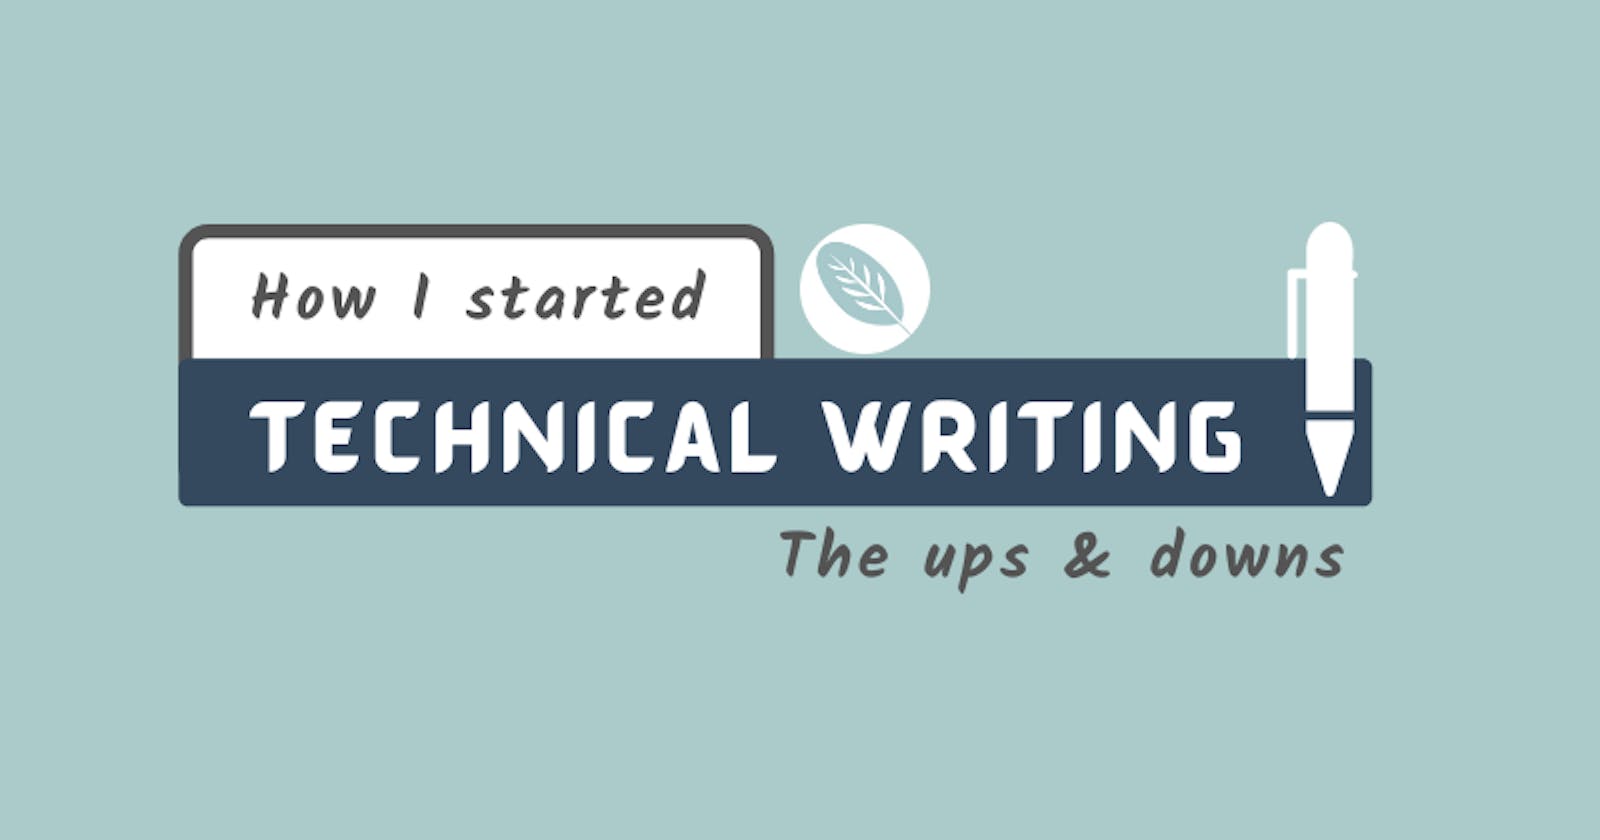 How I started Technical Writing